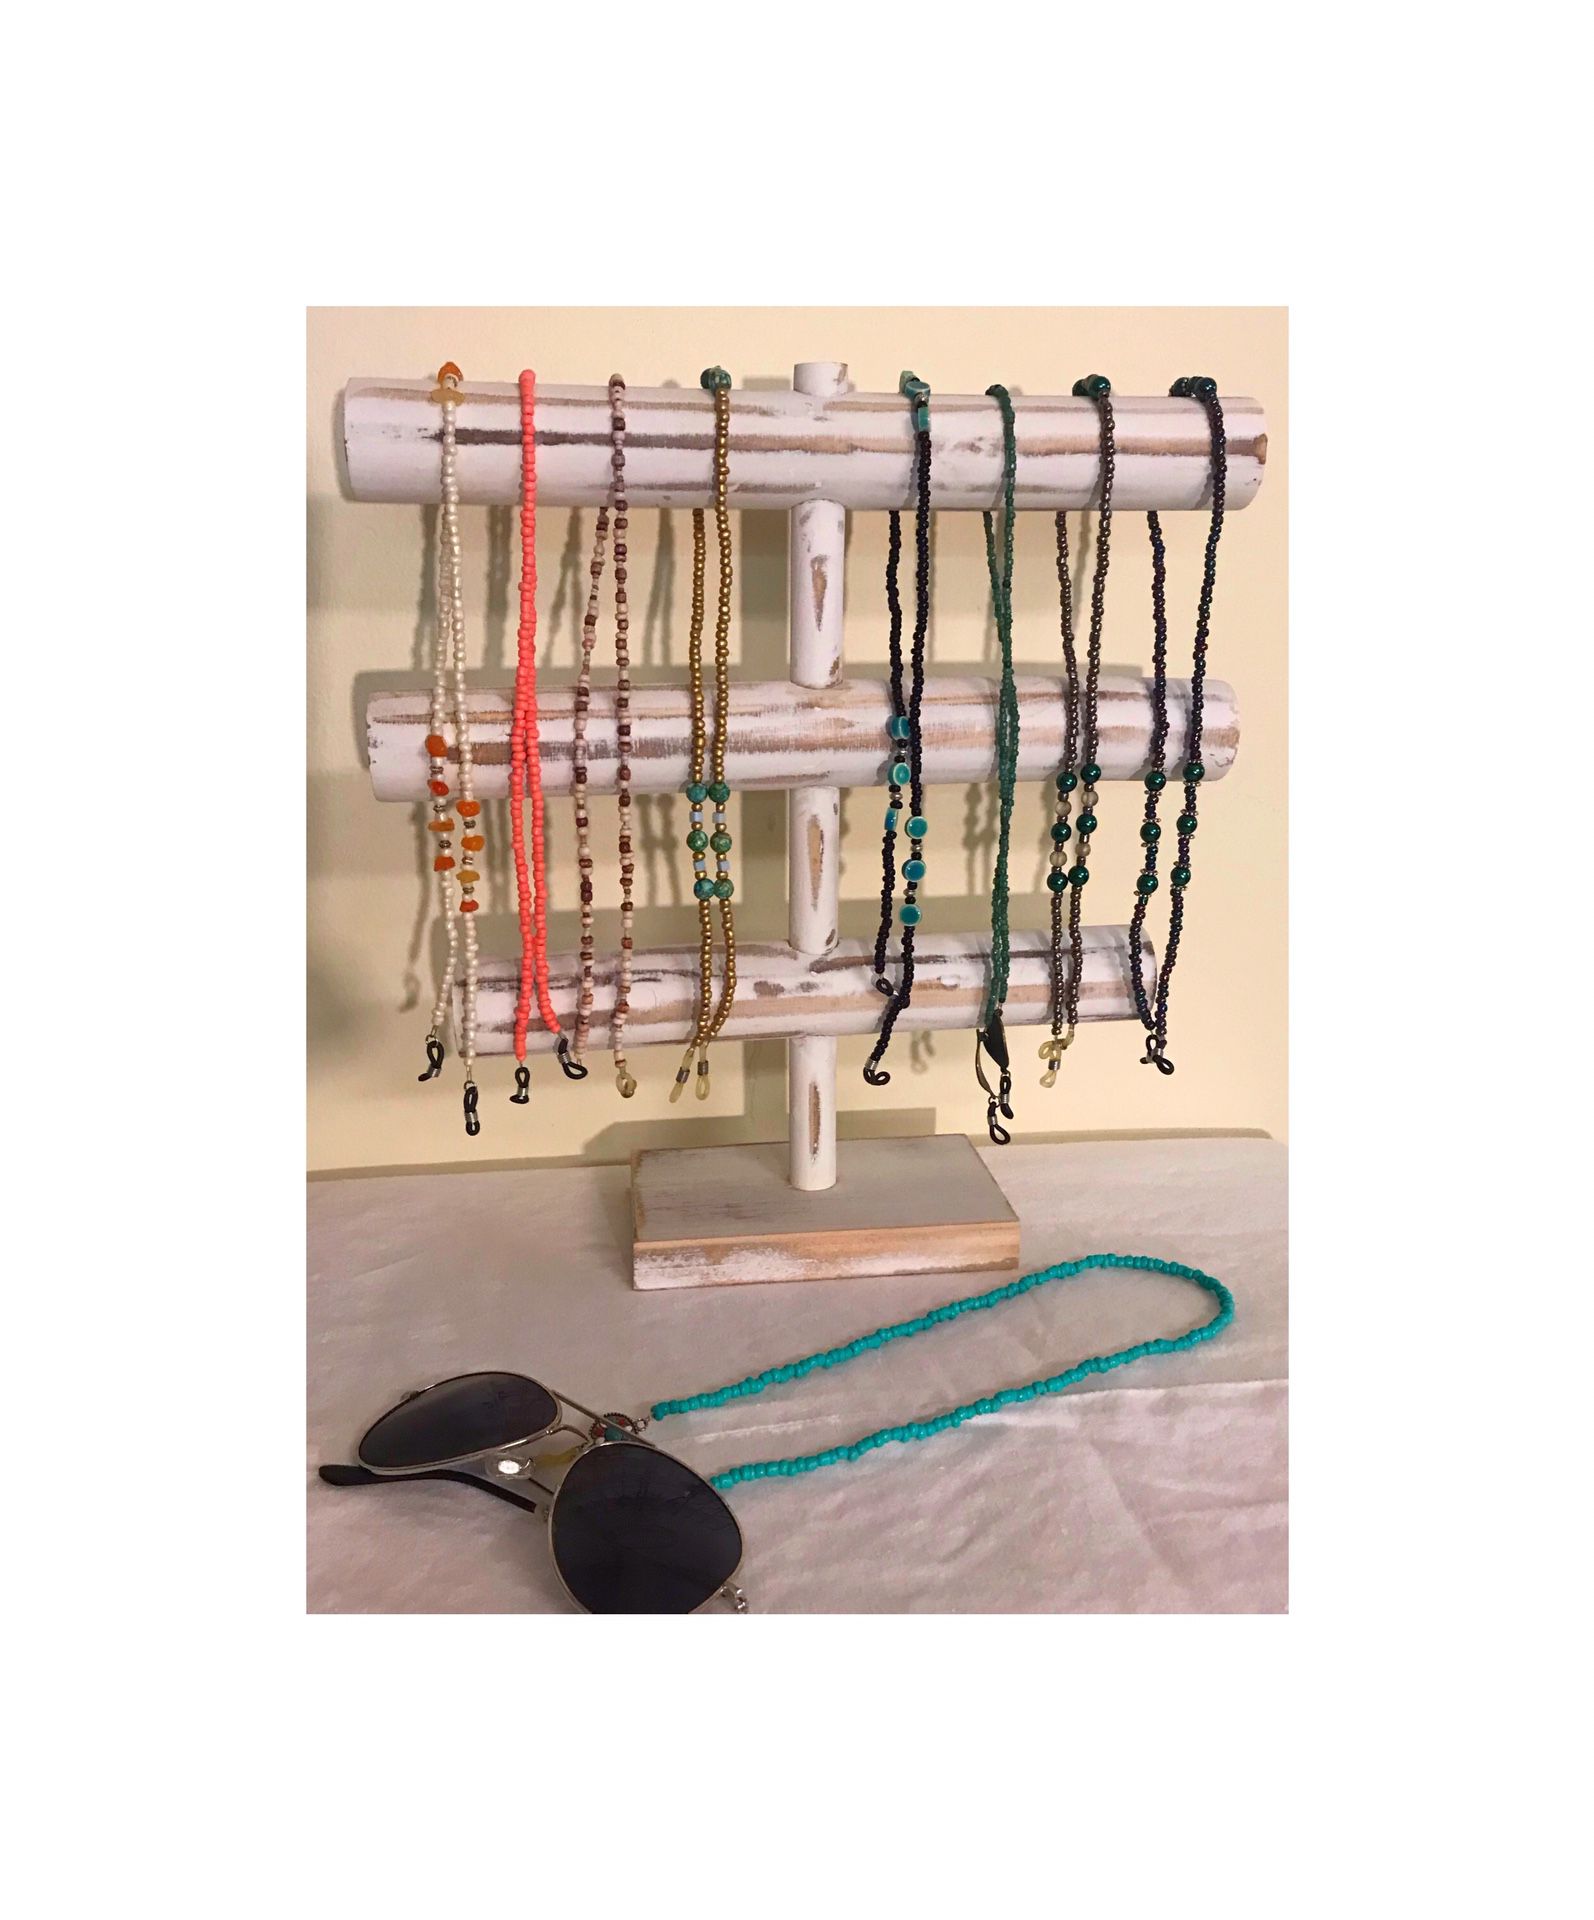 Handmade Beaded Eyeglass Chains w/ Rubber Connectors and Metal Springs